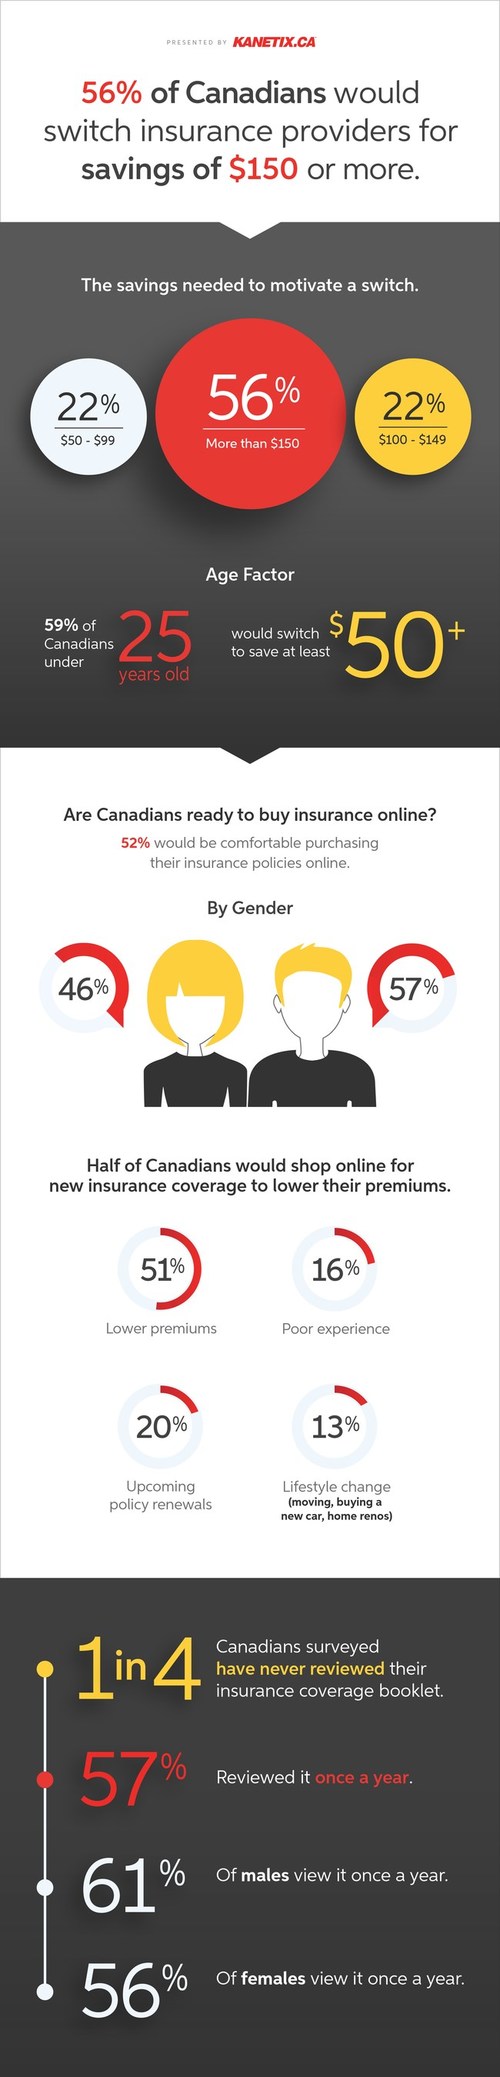 56 per cent of Canadians would switch insurance providers for a savings of $150 or more Kanetix.ca survey finds (CNW Group/Kanetix)